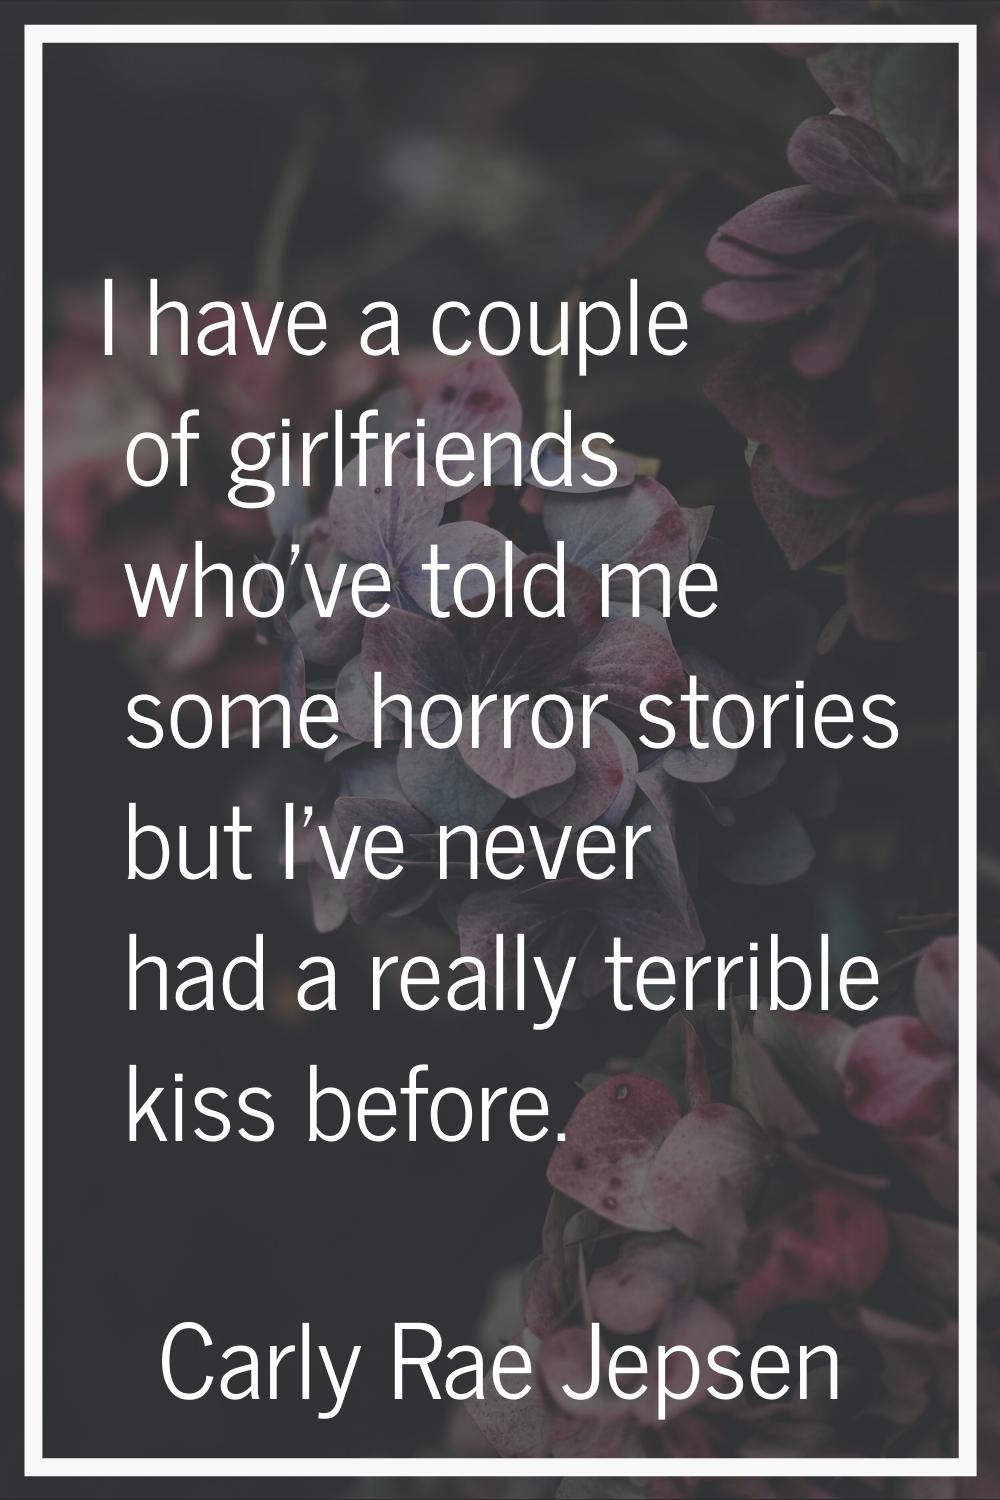 I have a couple of girlfriends who've told me some horror stories but I've never had a really terri